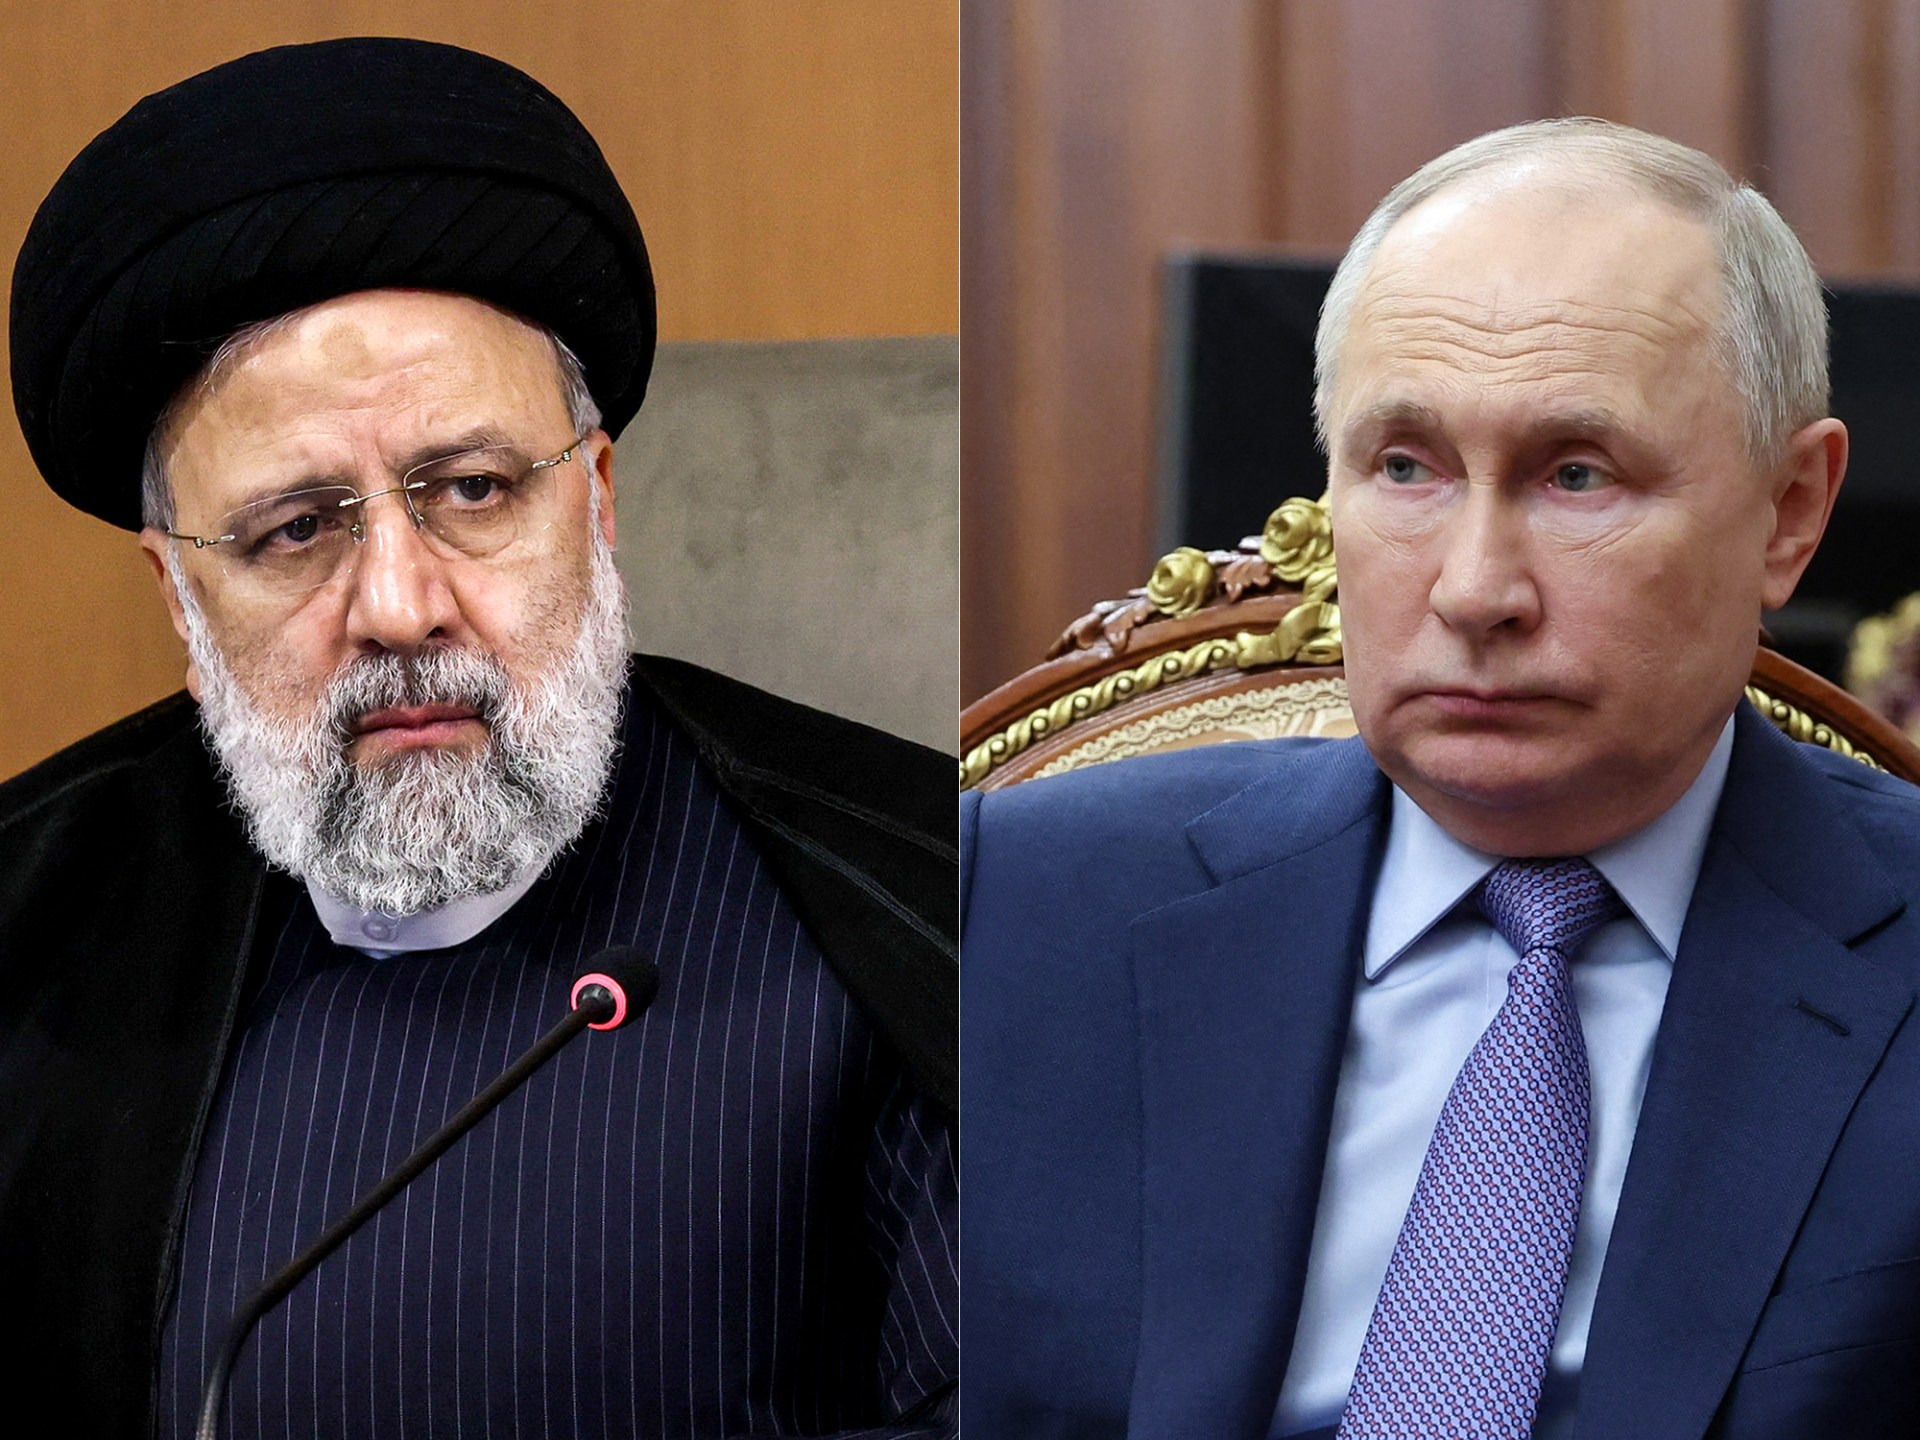 Russia’s Putin urges restraint in call with Iran’s Raisi as tensions soar